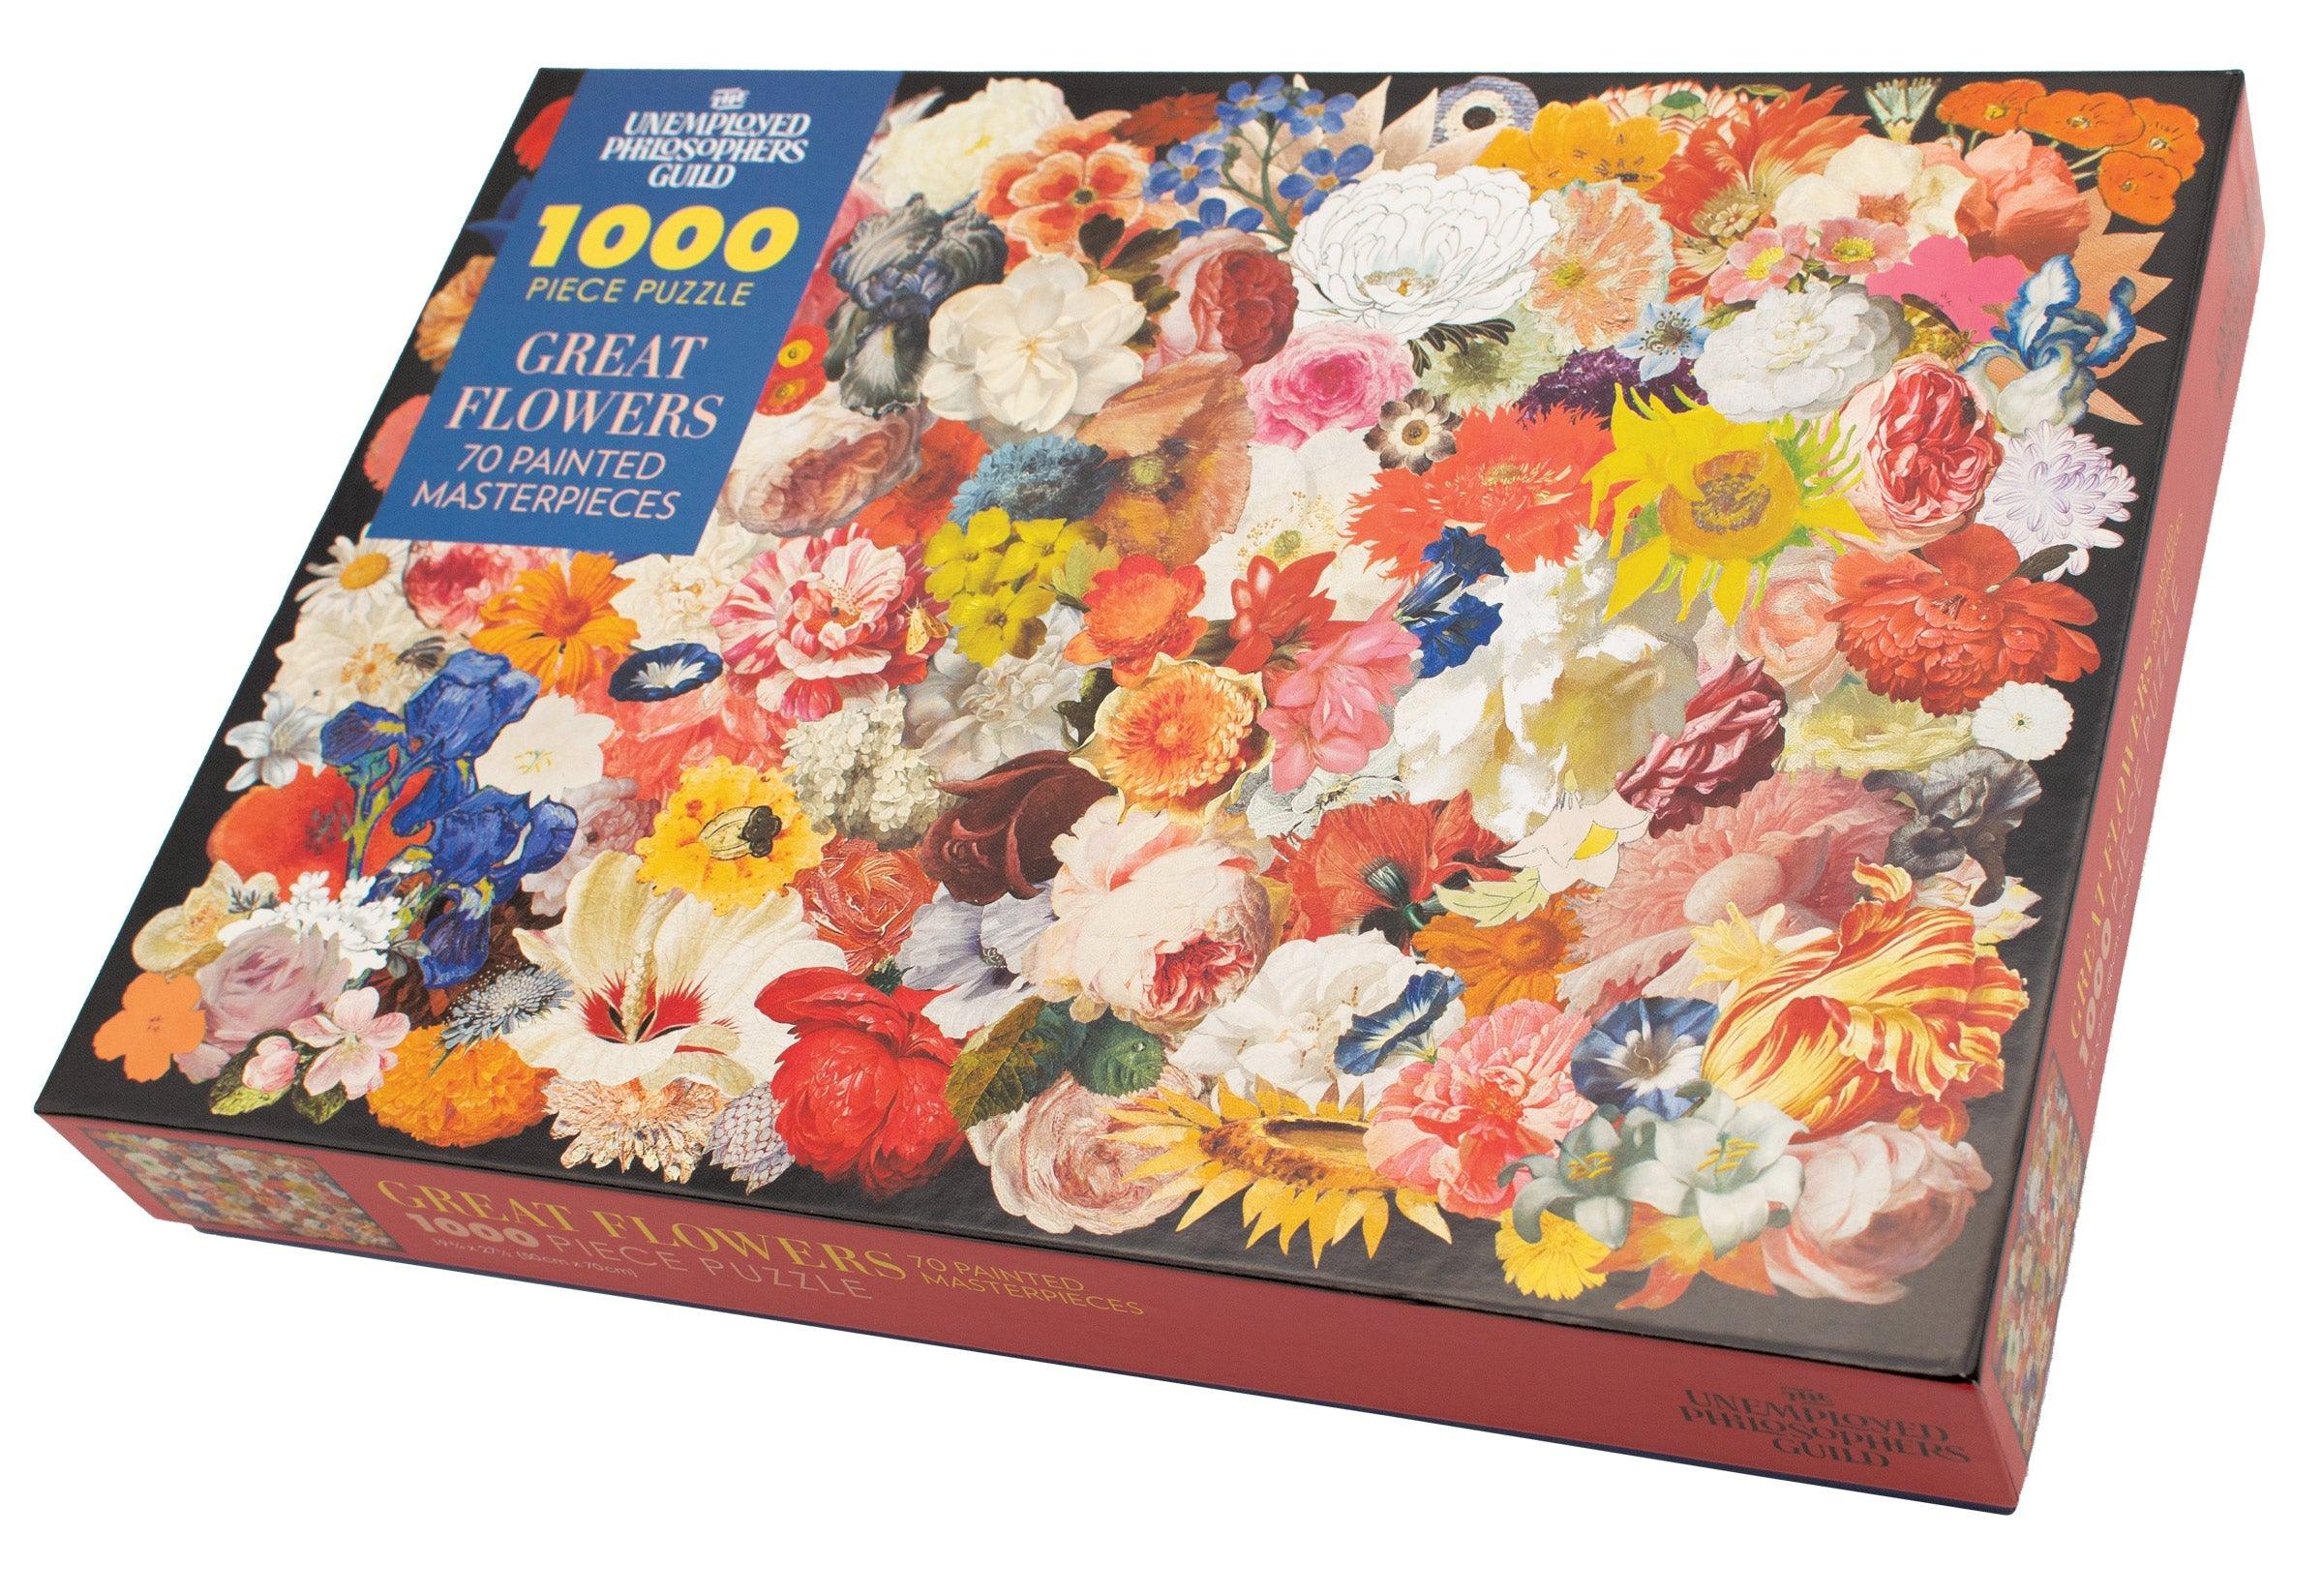 Product photo of Art Flowers Jigsaw Puzzle, a novelty gift manufactured by The Unemployed Philosophers Guild.